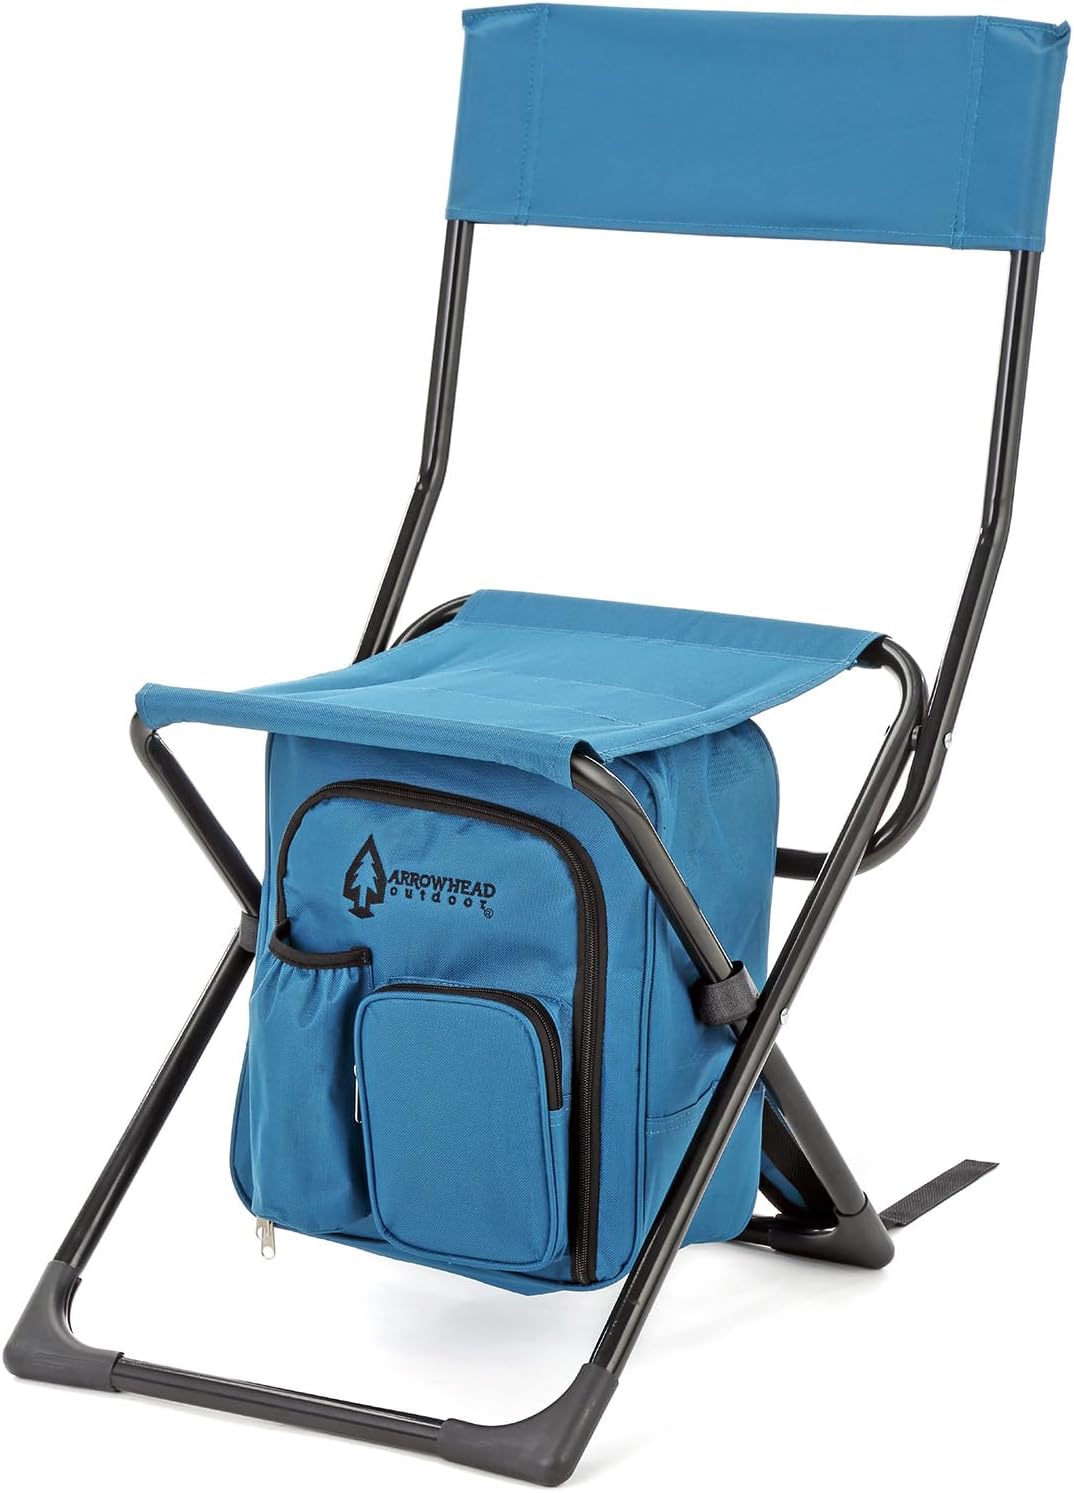 Backpackable Stool with Backrest and Cooler - Large Seat